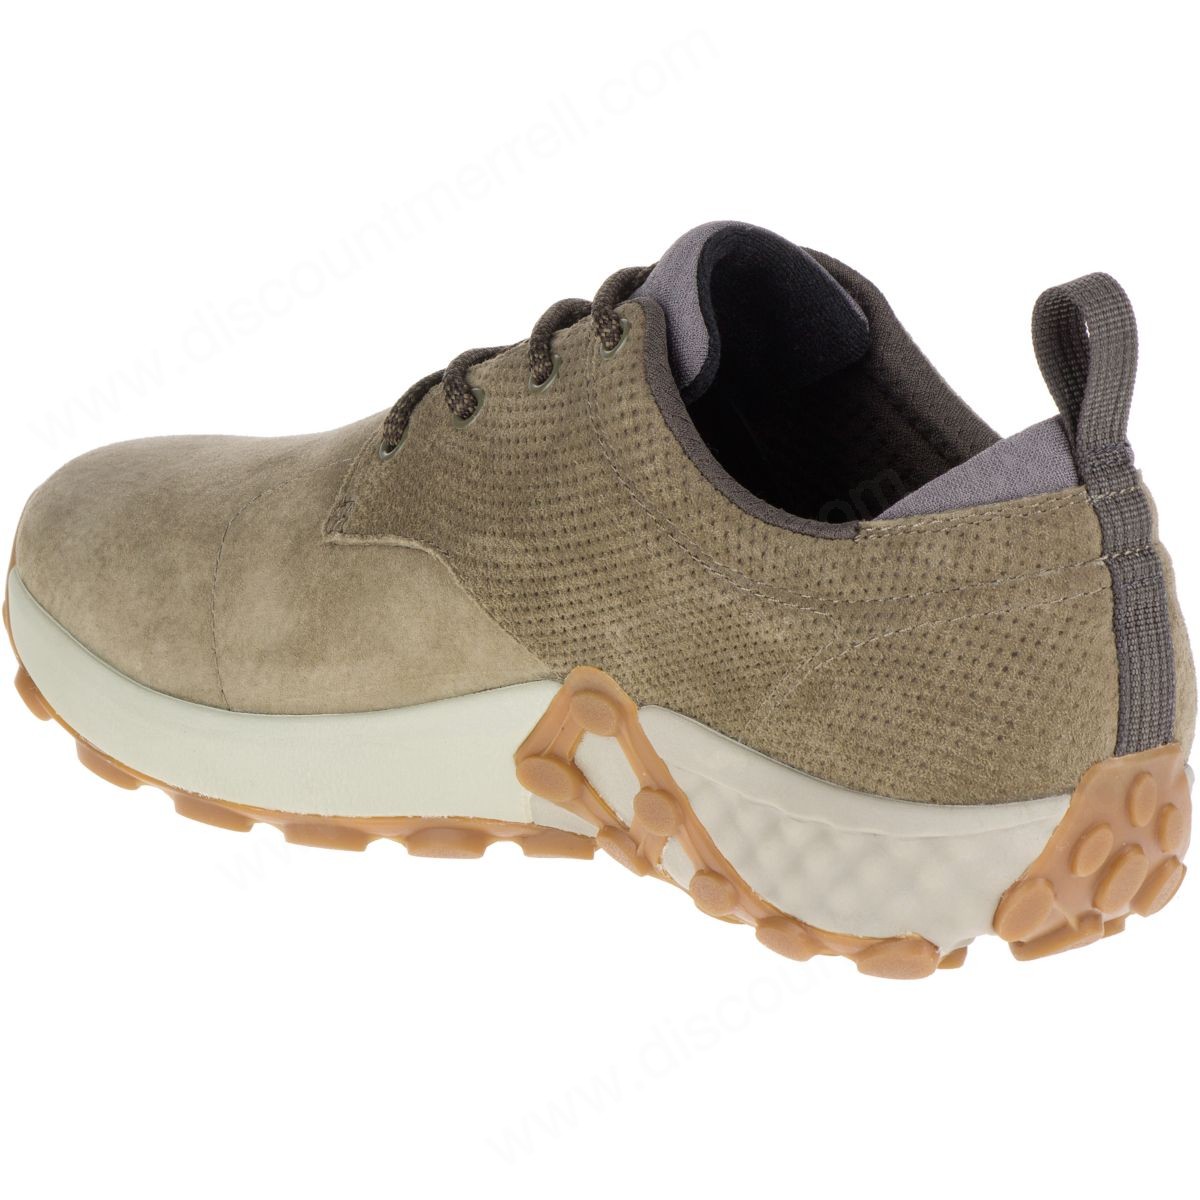 Merrell Mens's Jungle Lace Ac+ Dusty Olive - -6